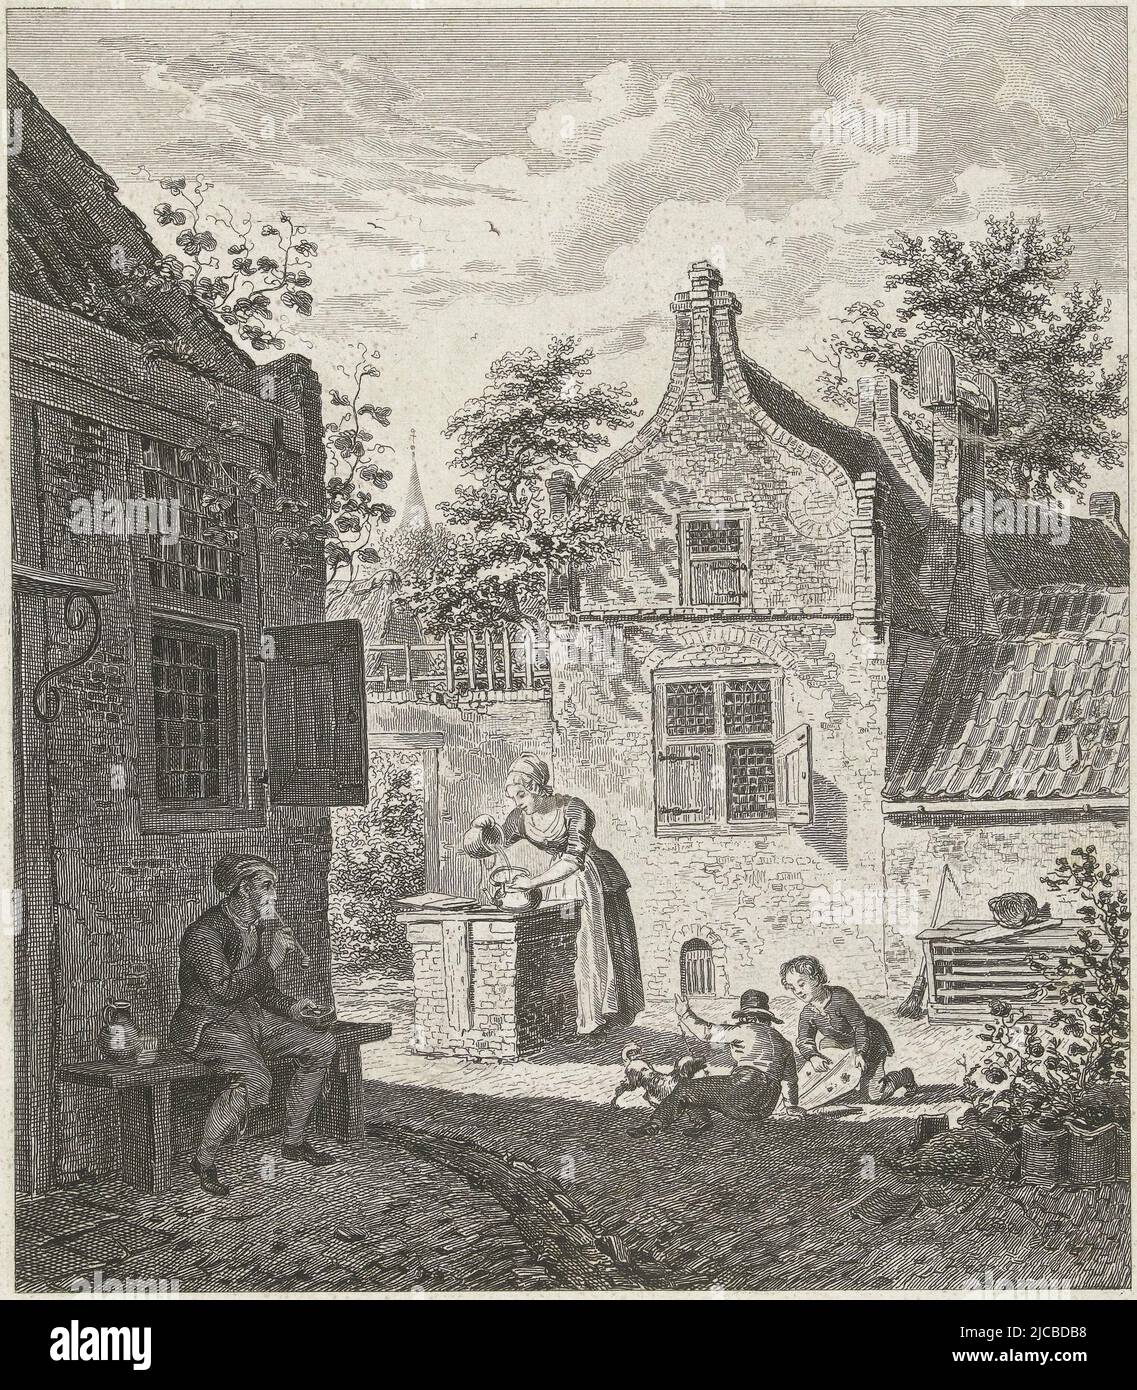 Courtyard with man smoking pipe on bench and woman filling kettle with water from well Two children playing with a dog pulling the string of a kite, Courtyard with man and woman and children playing, print maker: Johannes Alexander Rudolf Best, Amsterdam, 1807 - 1855, paper, etching, h 269 mm × w 223 mm Stock Photo